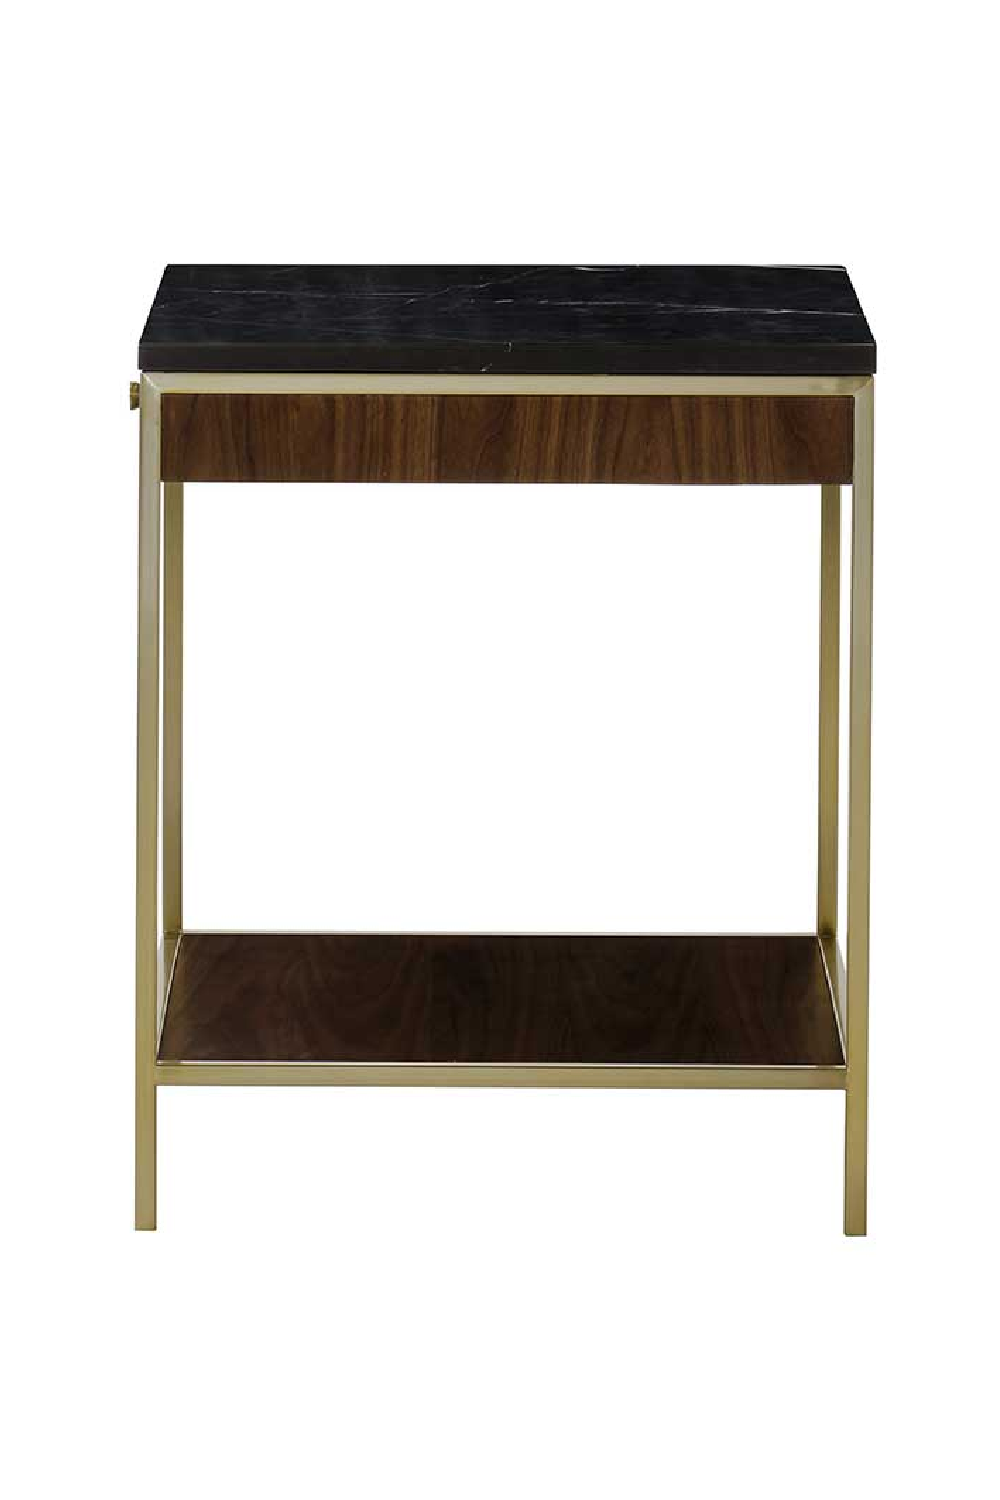 Black Marble Top Square Side Table S | Andrew Martin Chester  | Woodfurniture.com